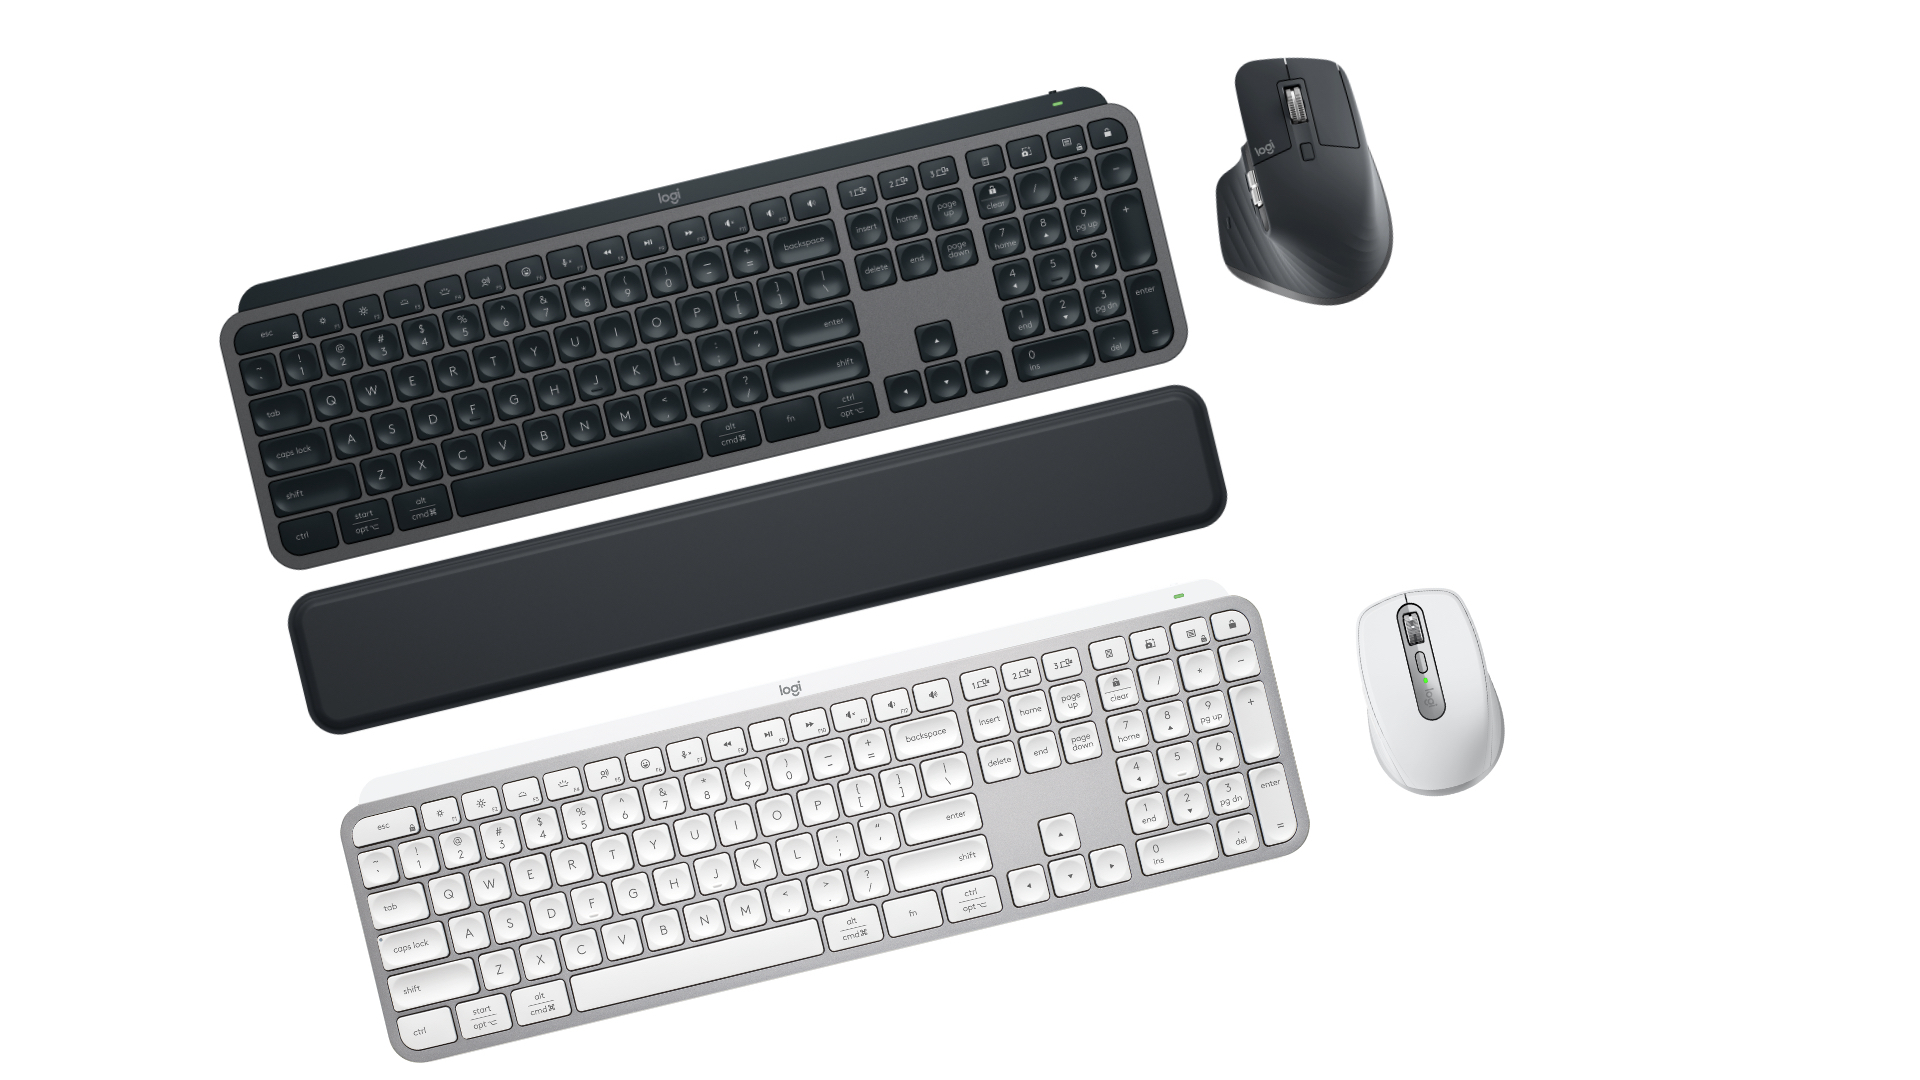 Offers First Ever MX Keyboard Combo with New Software Increase Flow and Productivity | Business Wire